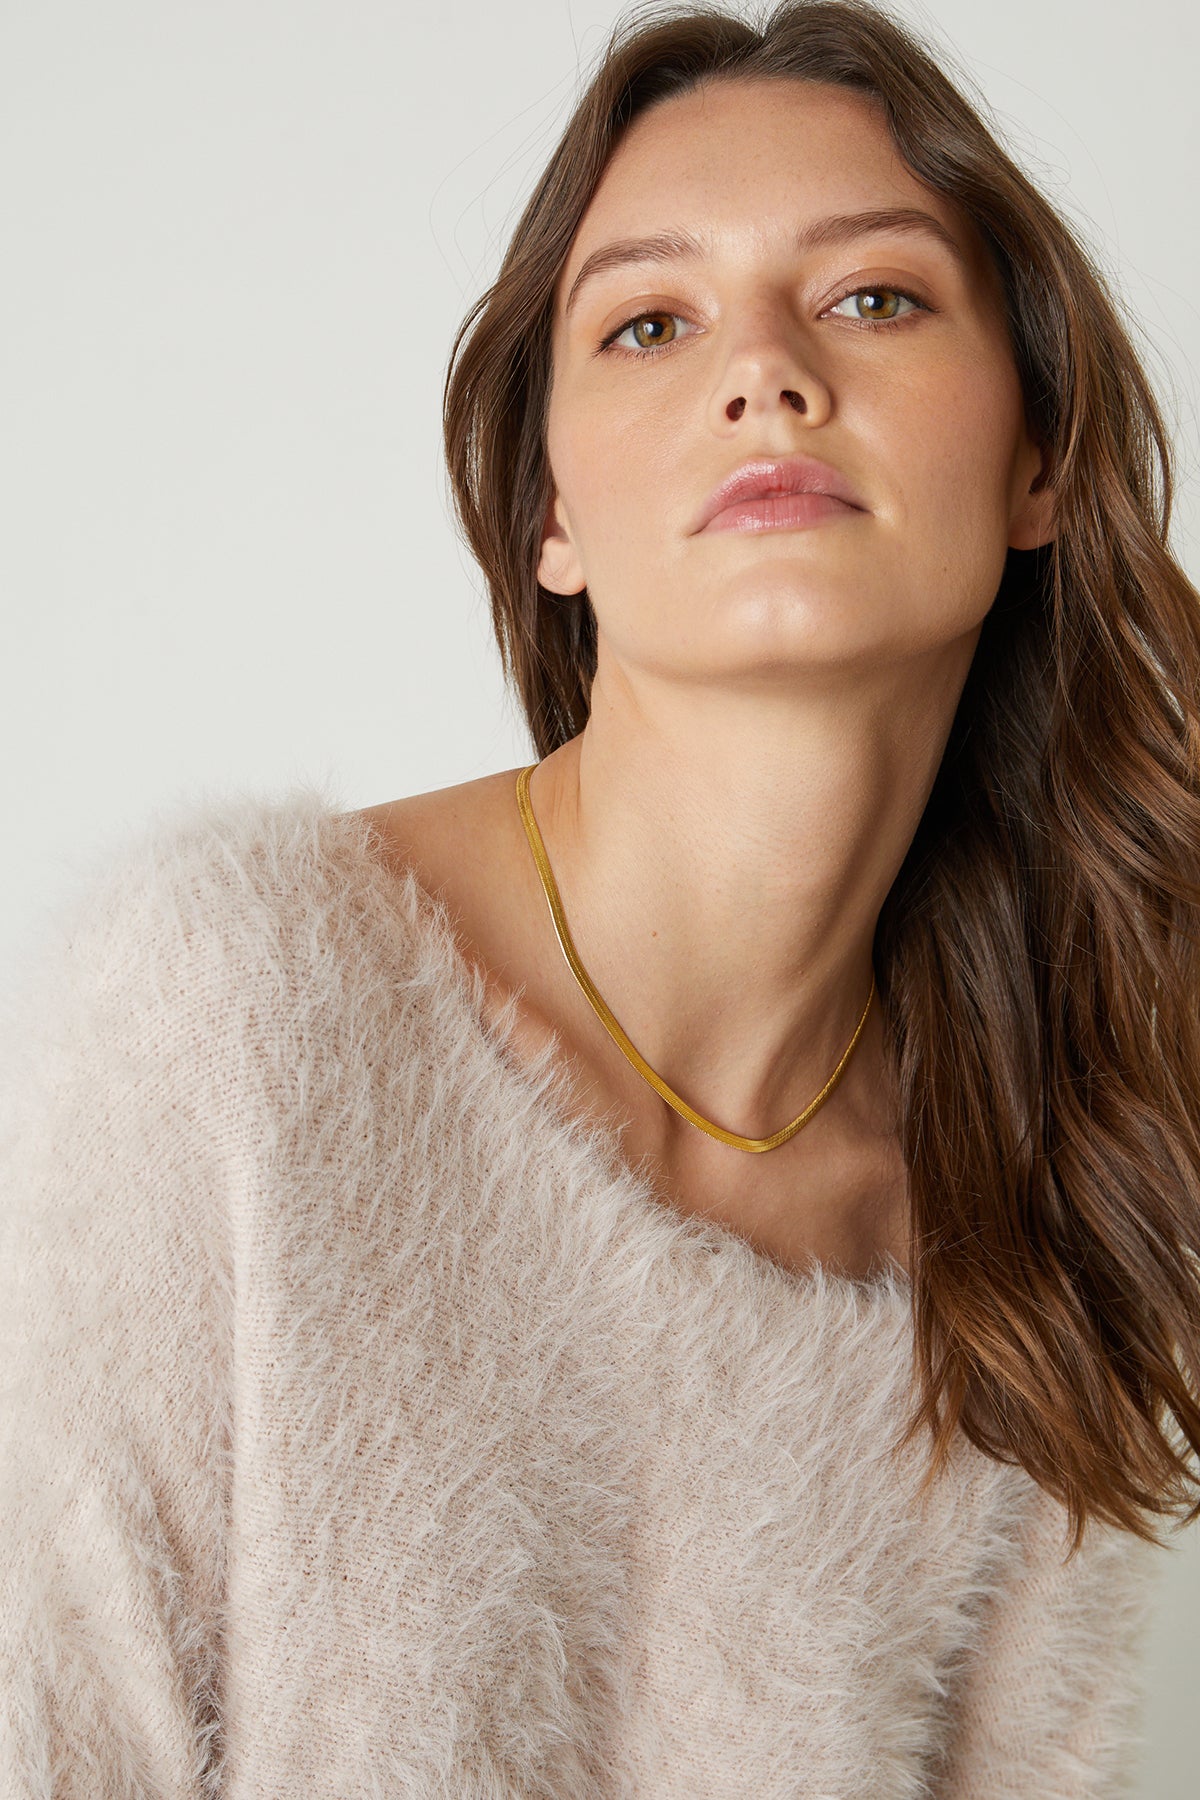 Betty Feather Yarn Boat Neck Sweater in pale blush pink front detail with gold necklace-25548650873025